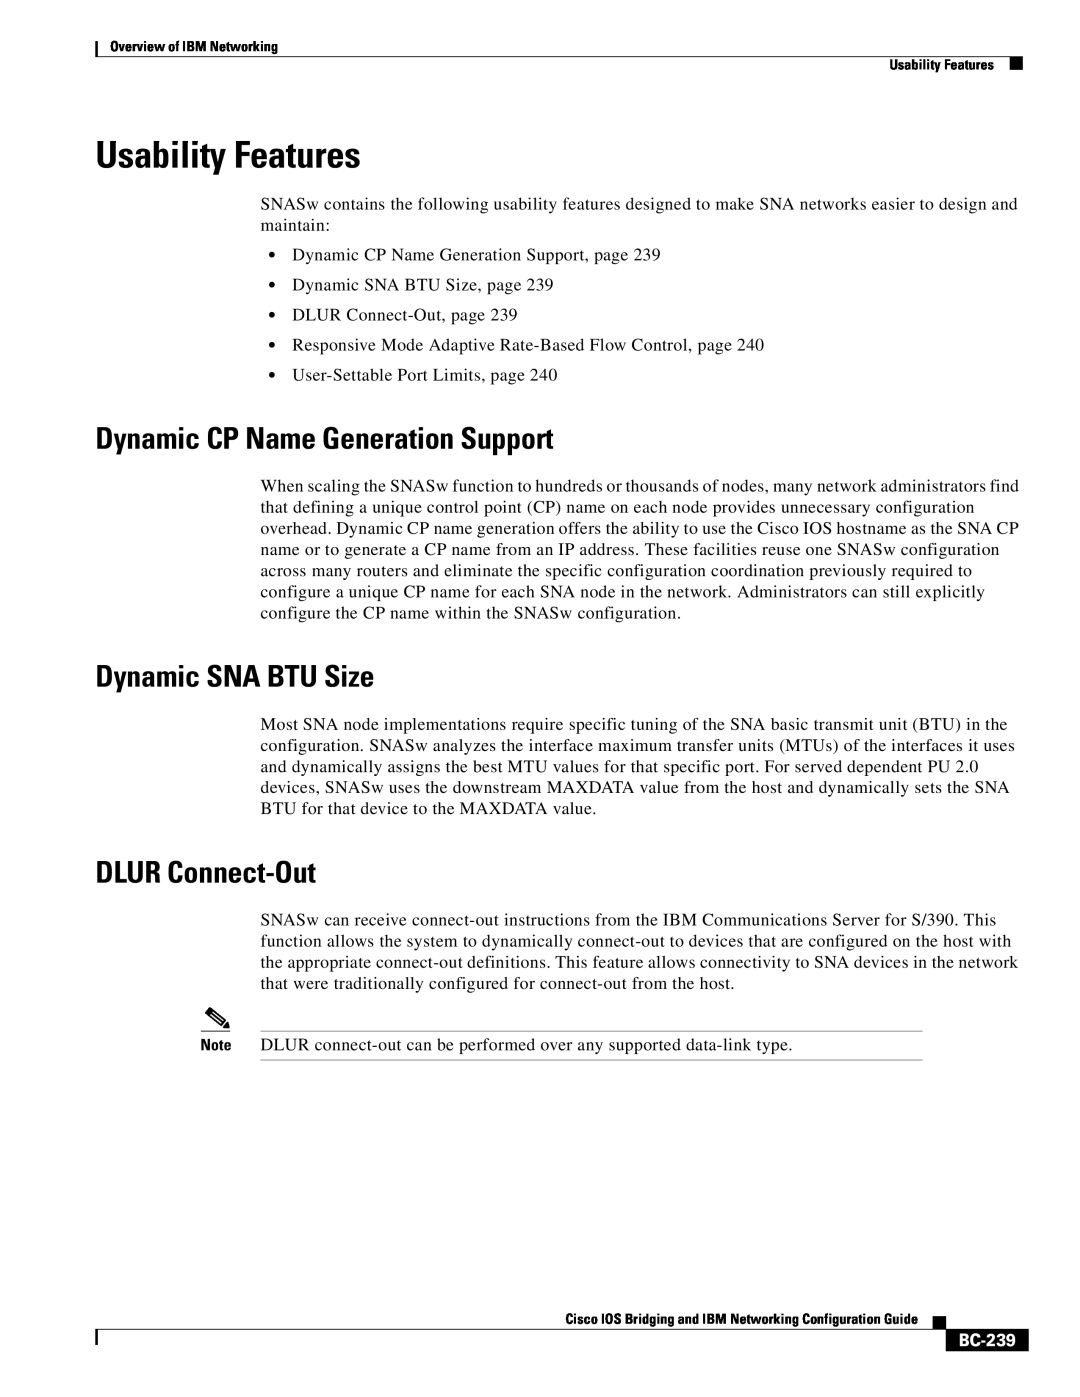 IBM BC-203 manual Usability Features, Dynamic CP Name Generation Support, Dynamic SNA BTU Size, DLUR Connect-Out, BC-239 